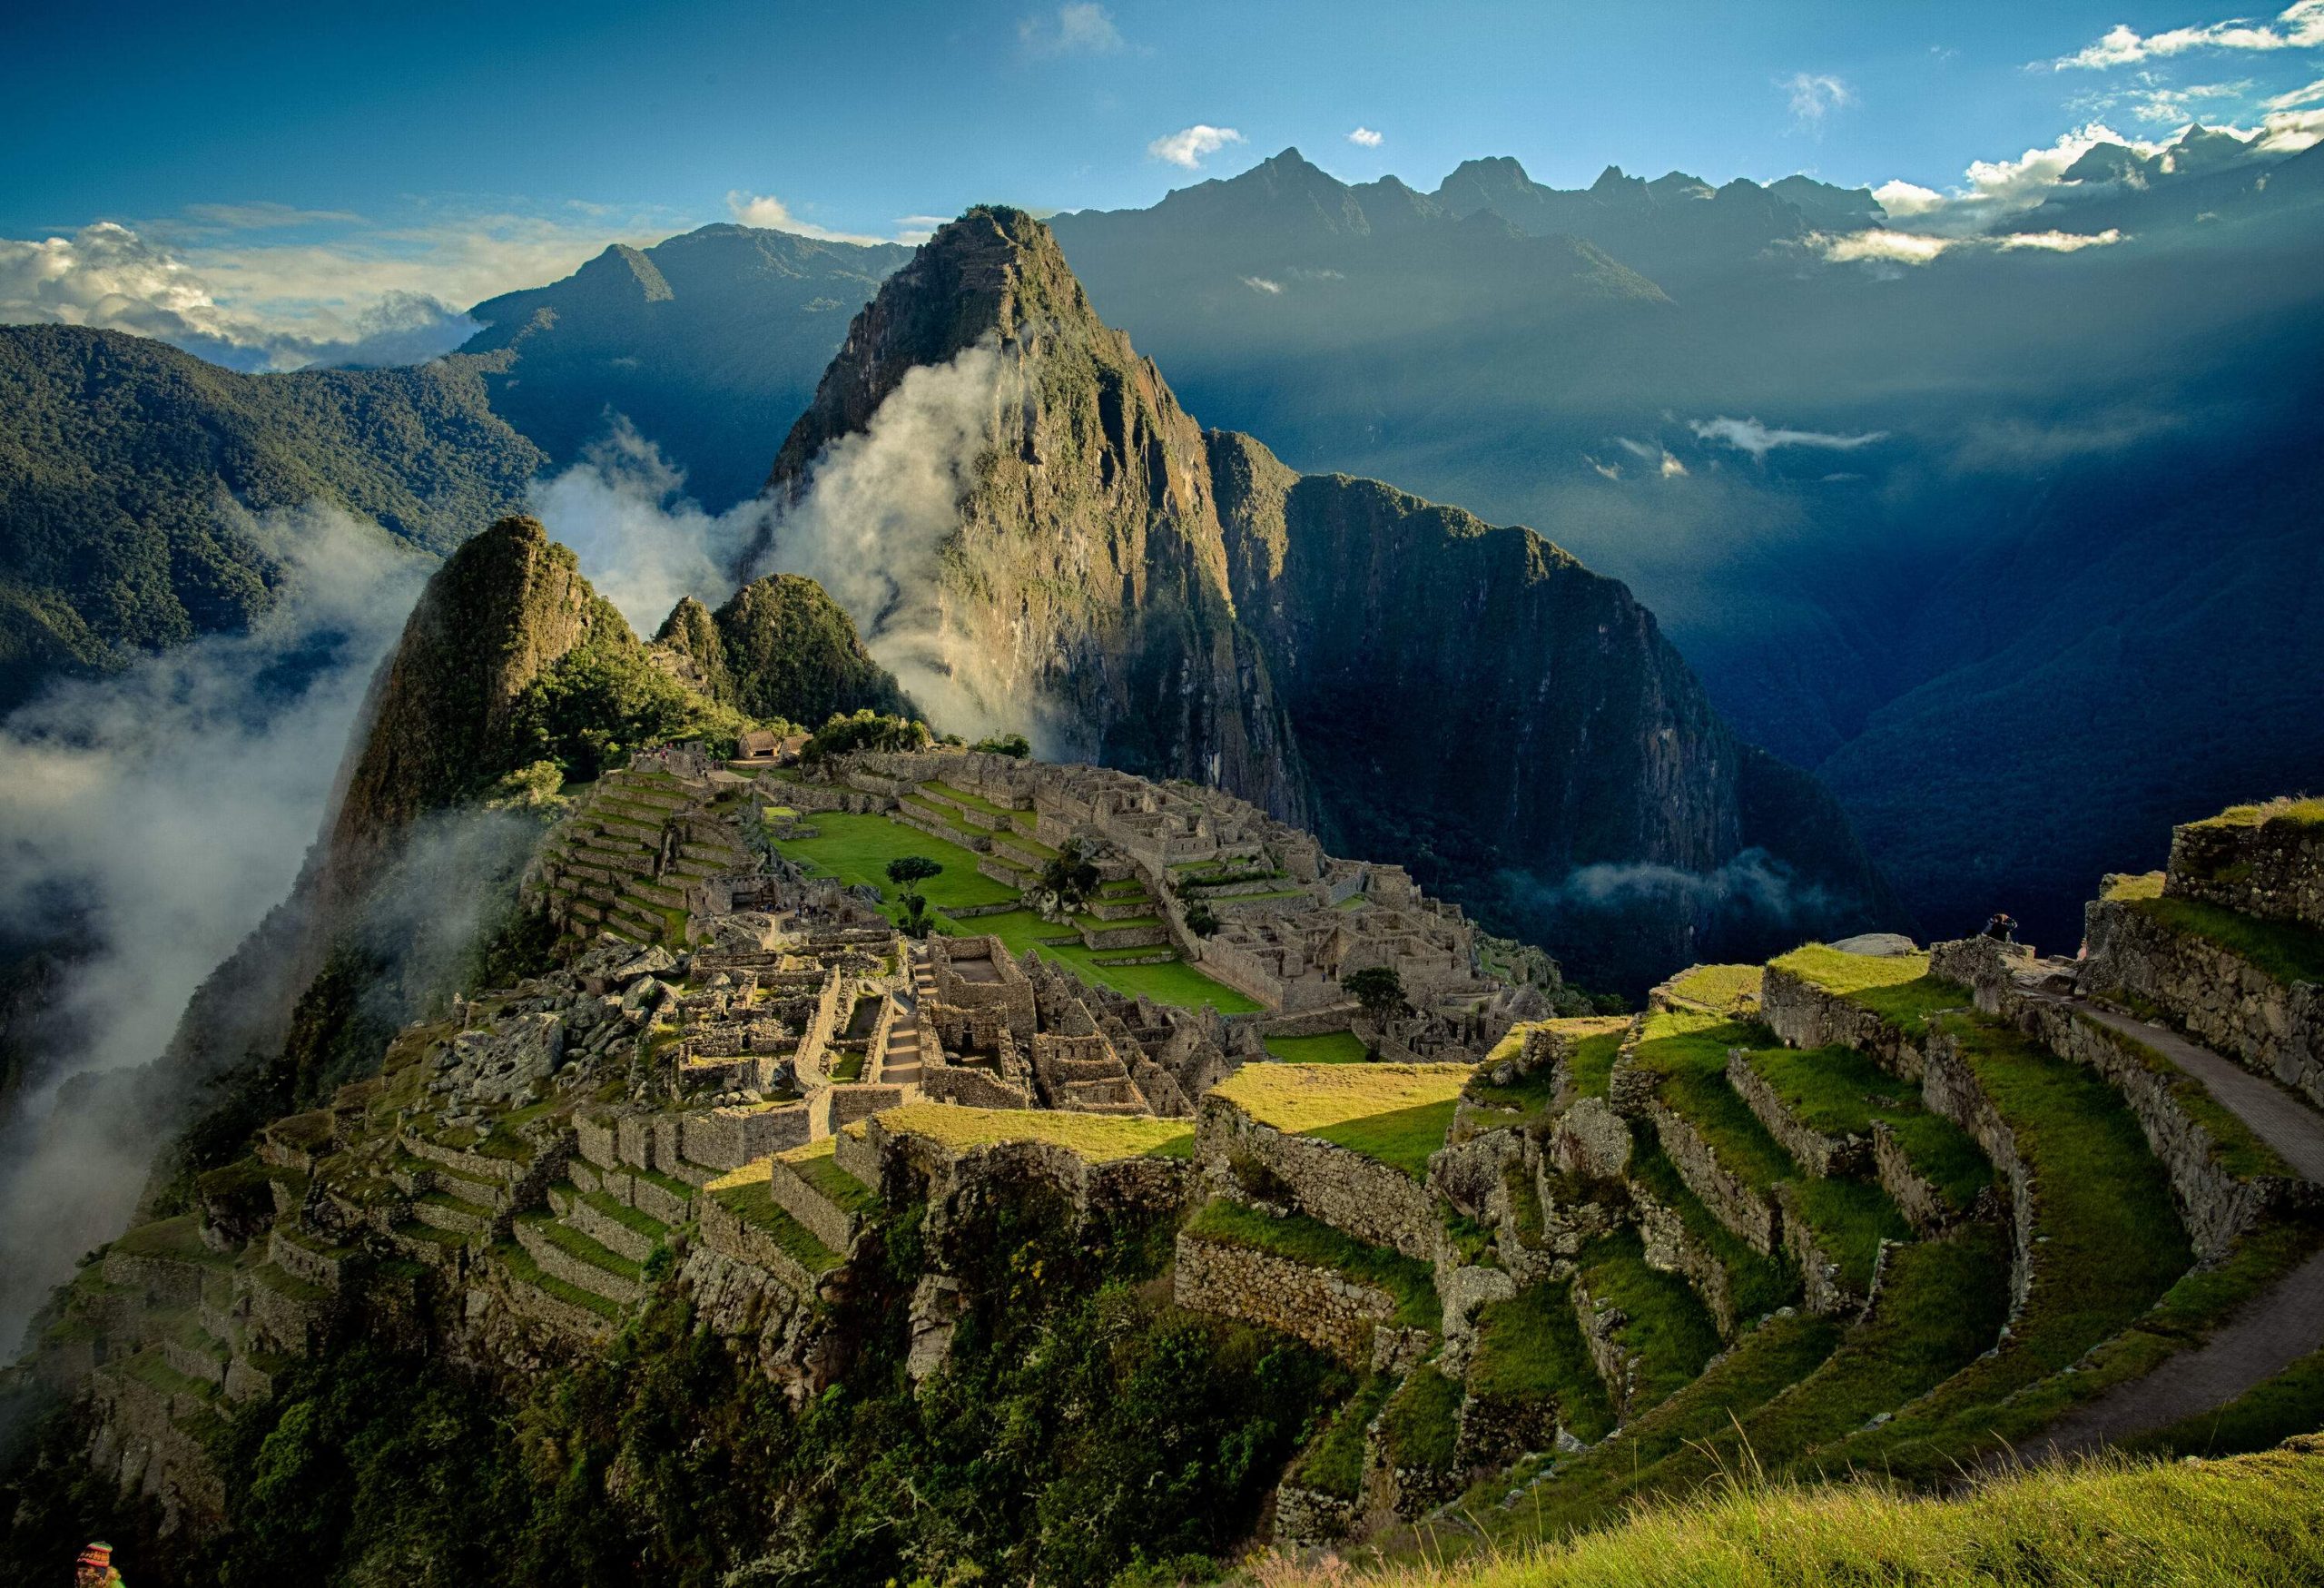 Machu Picchu is an ancient settlement on top of the mountains shrouded in fog.